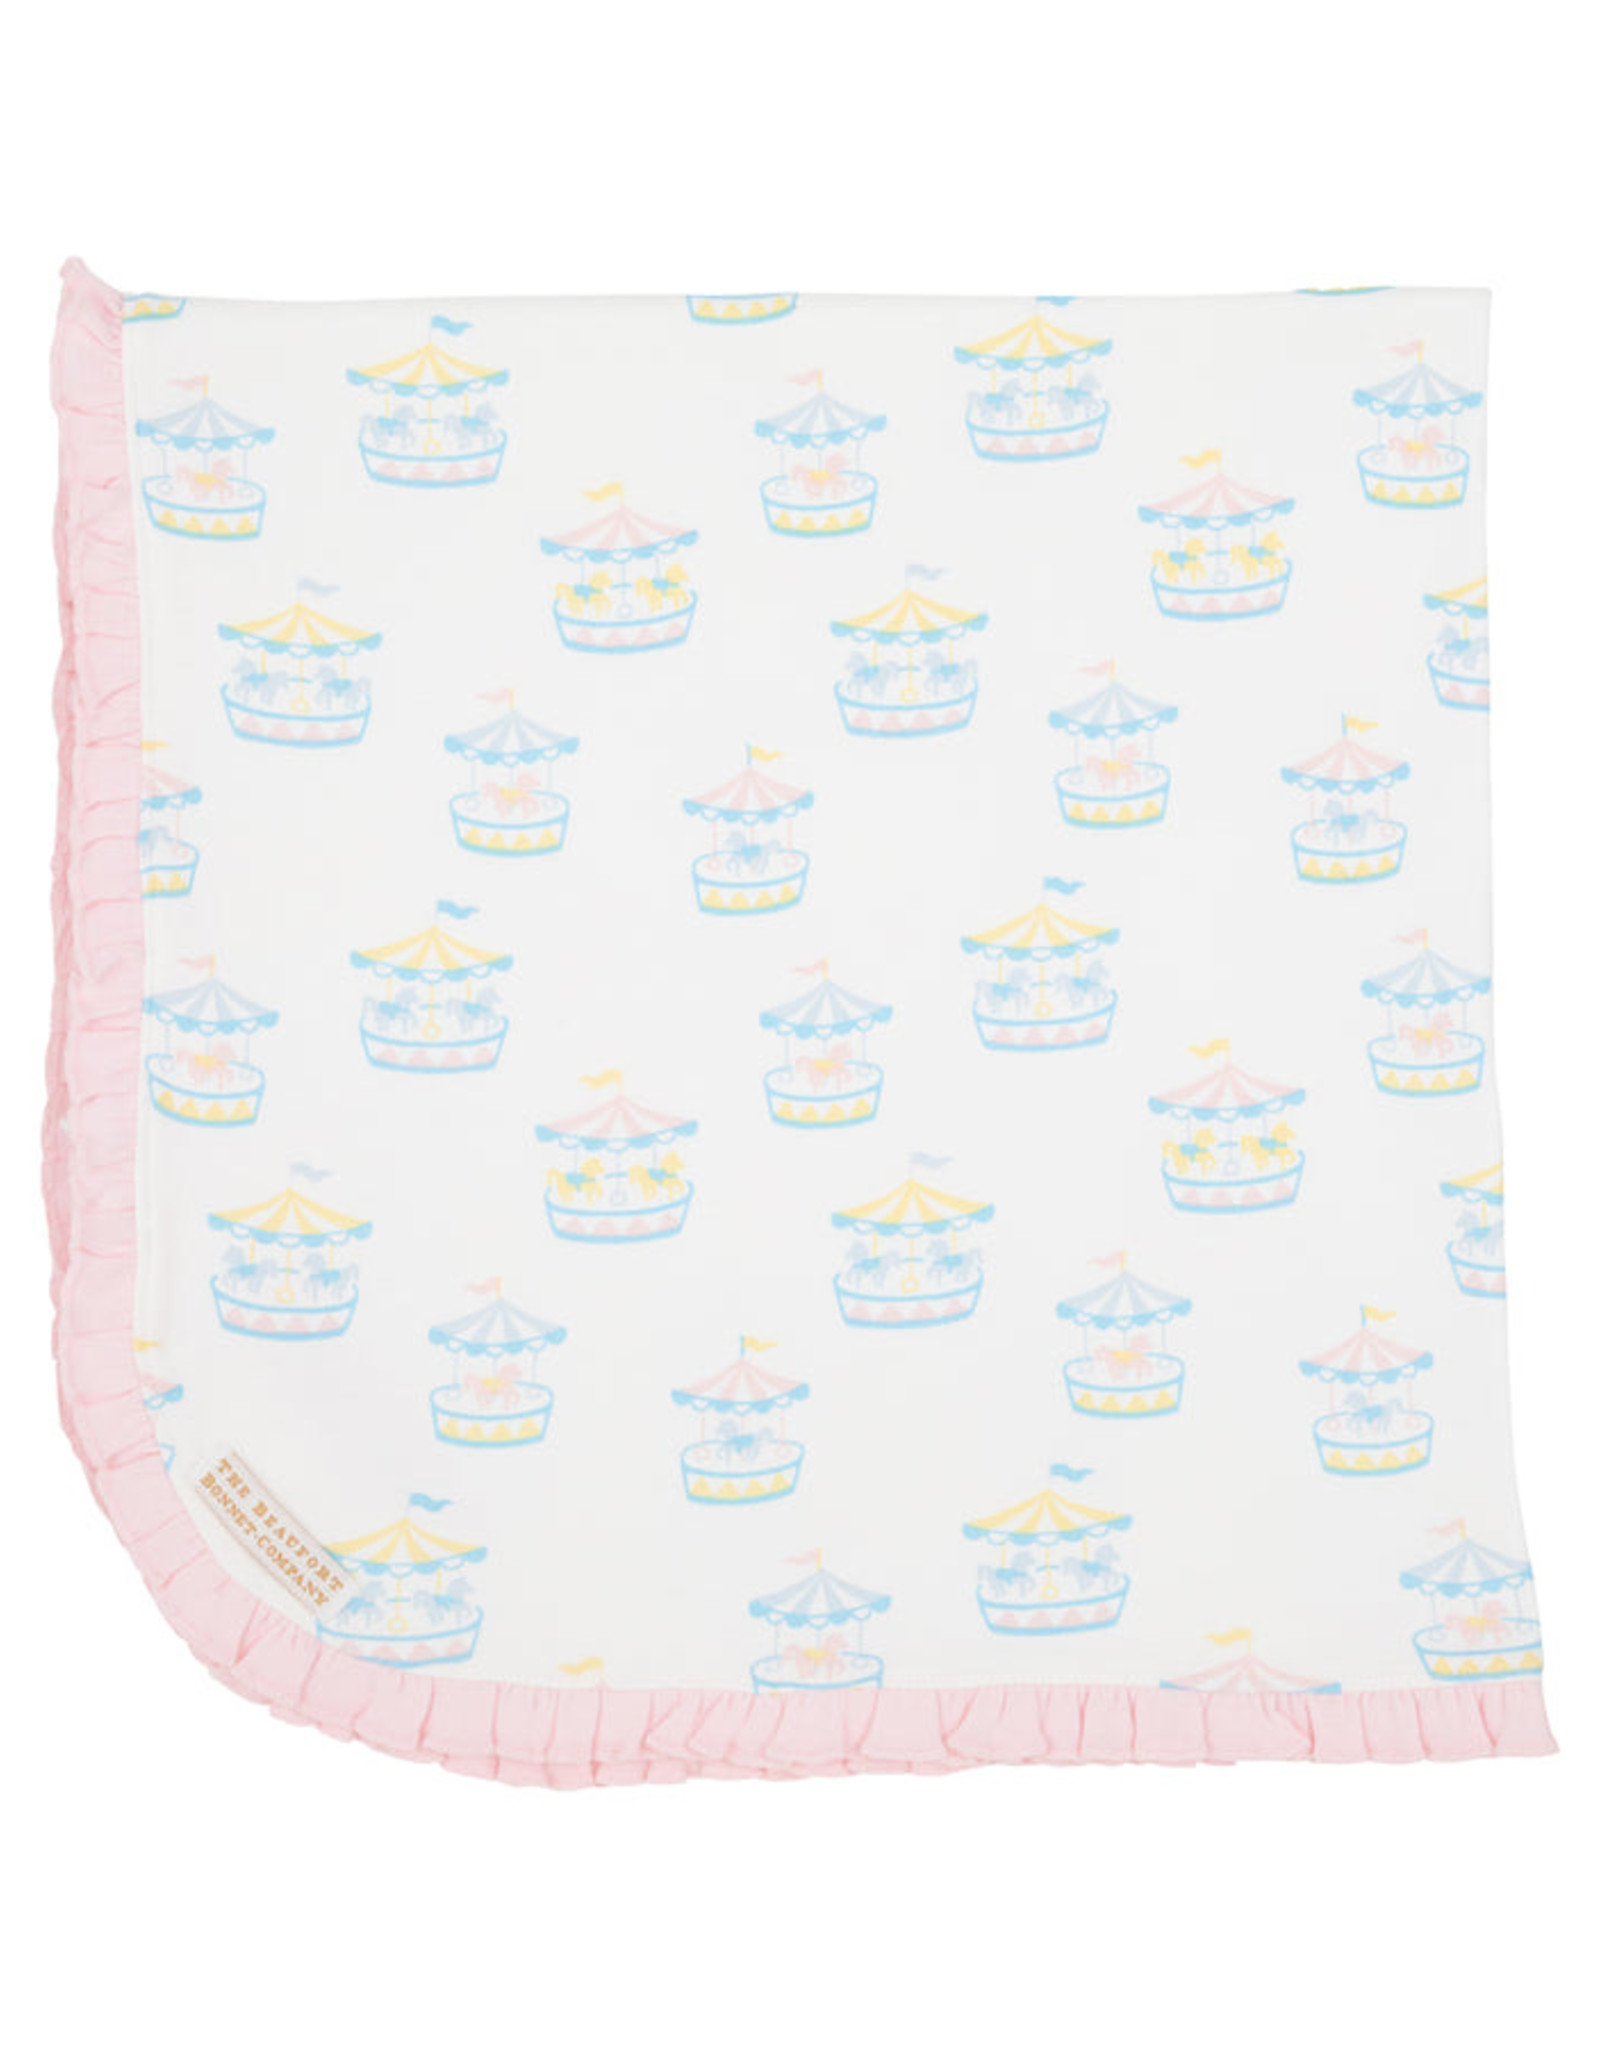 TBBC Baby Buggy Blanket Candy Stripe Carousel Palm Beach Pink